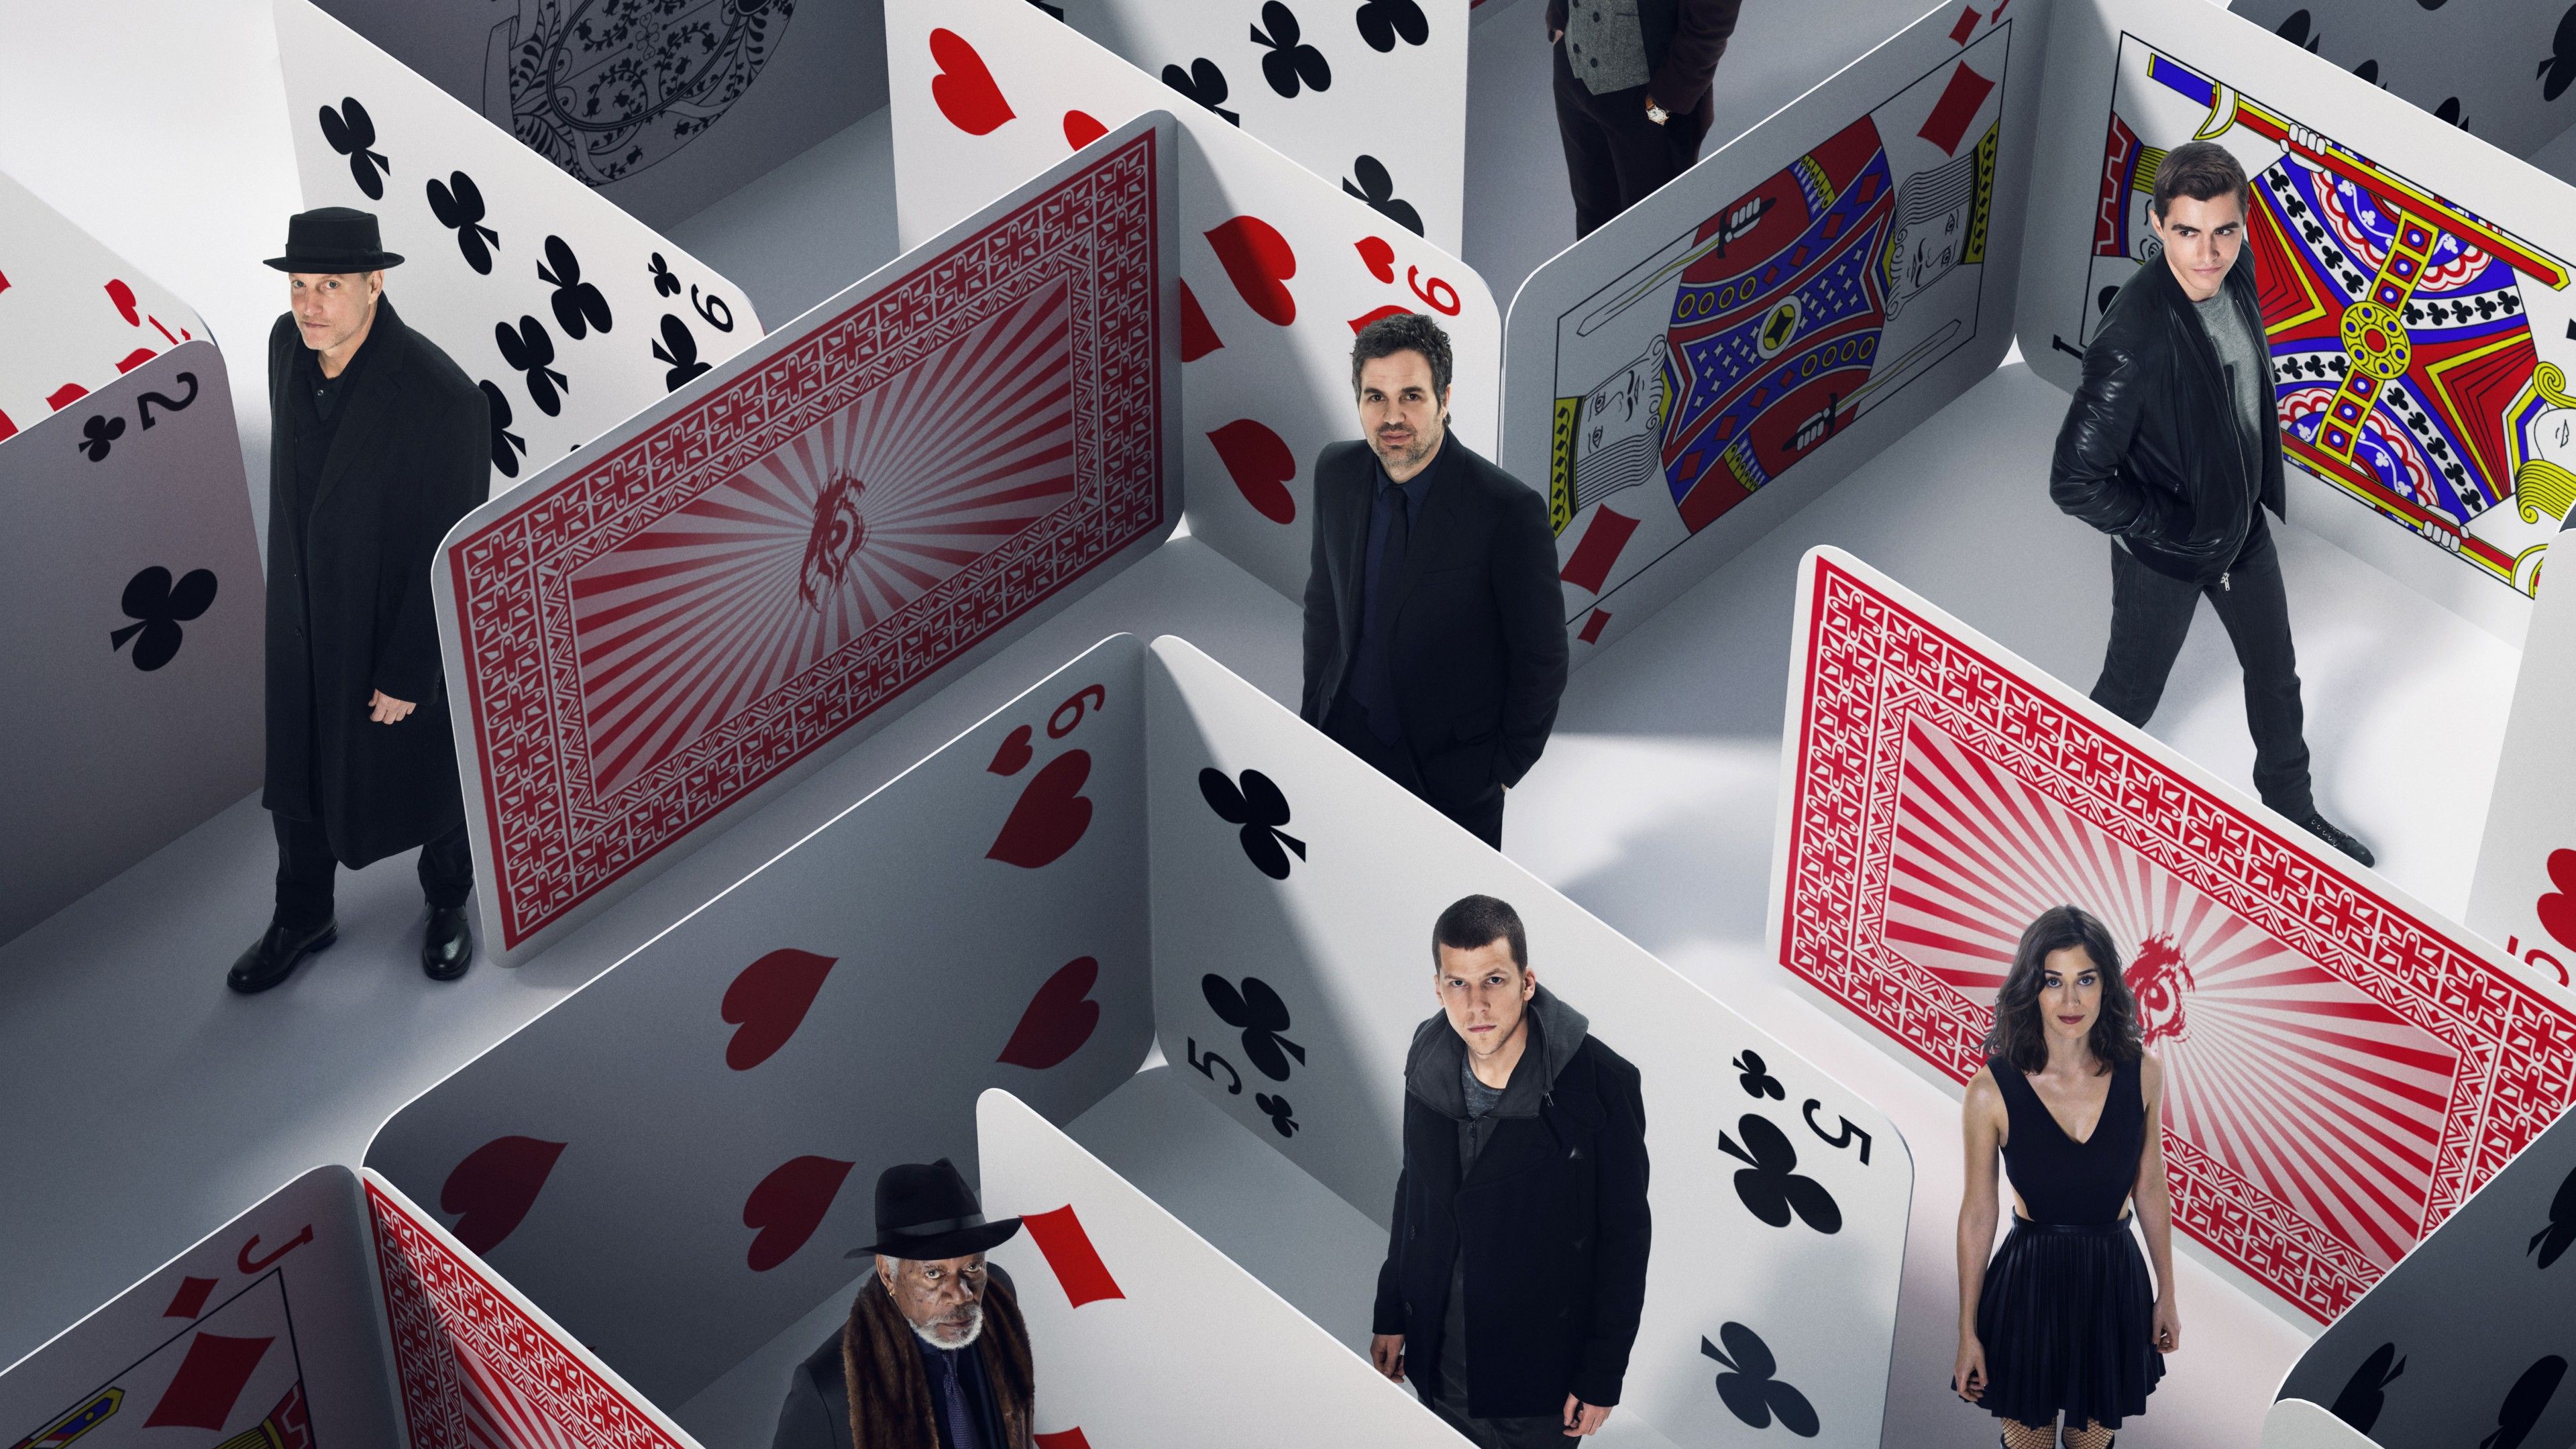 Wallpaper Now You See Me 2016 Movies, Movies